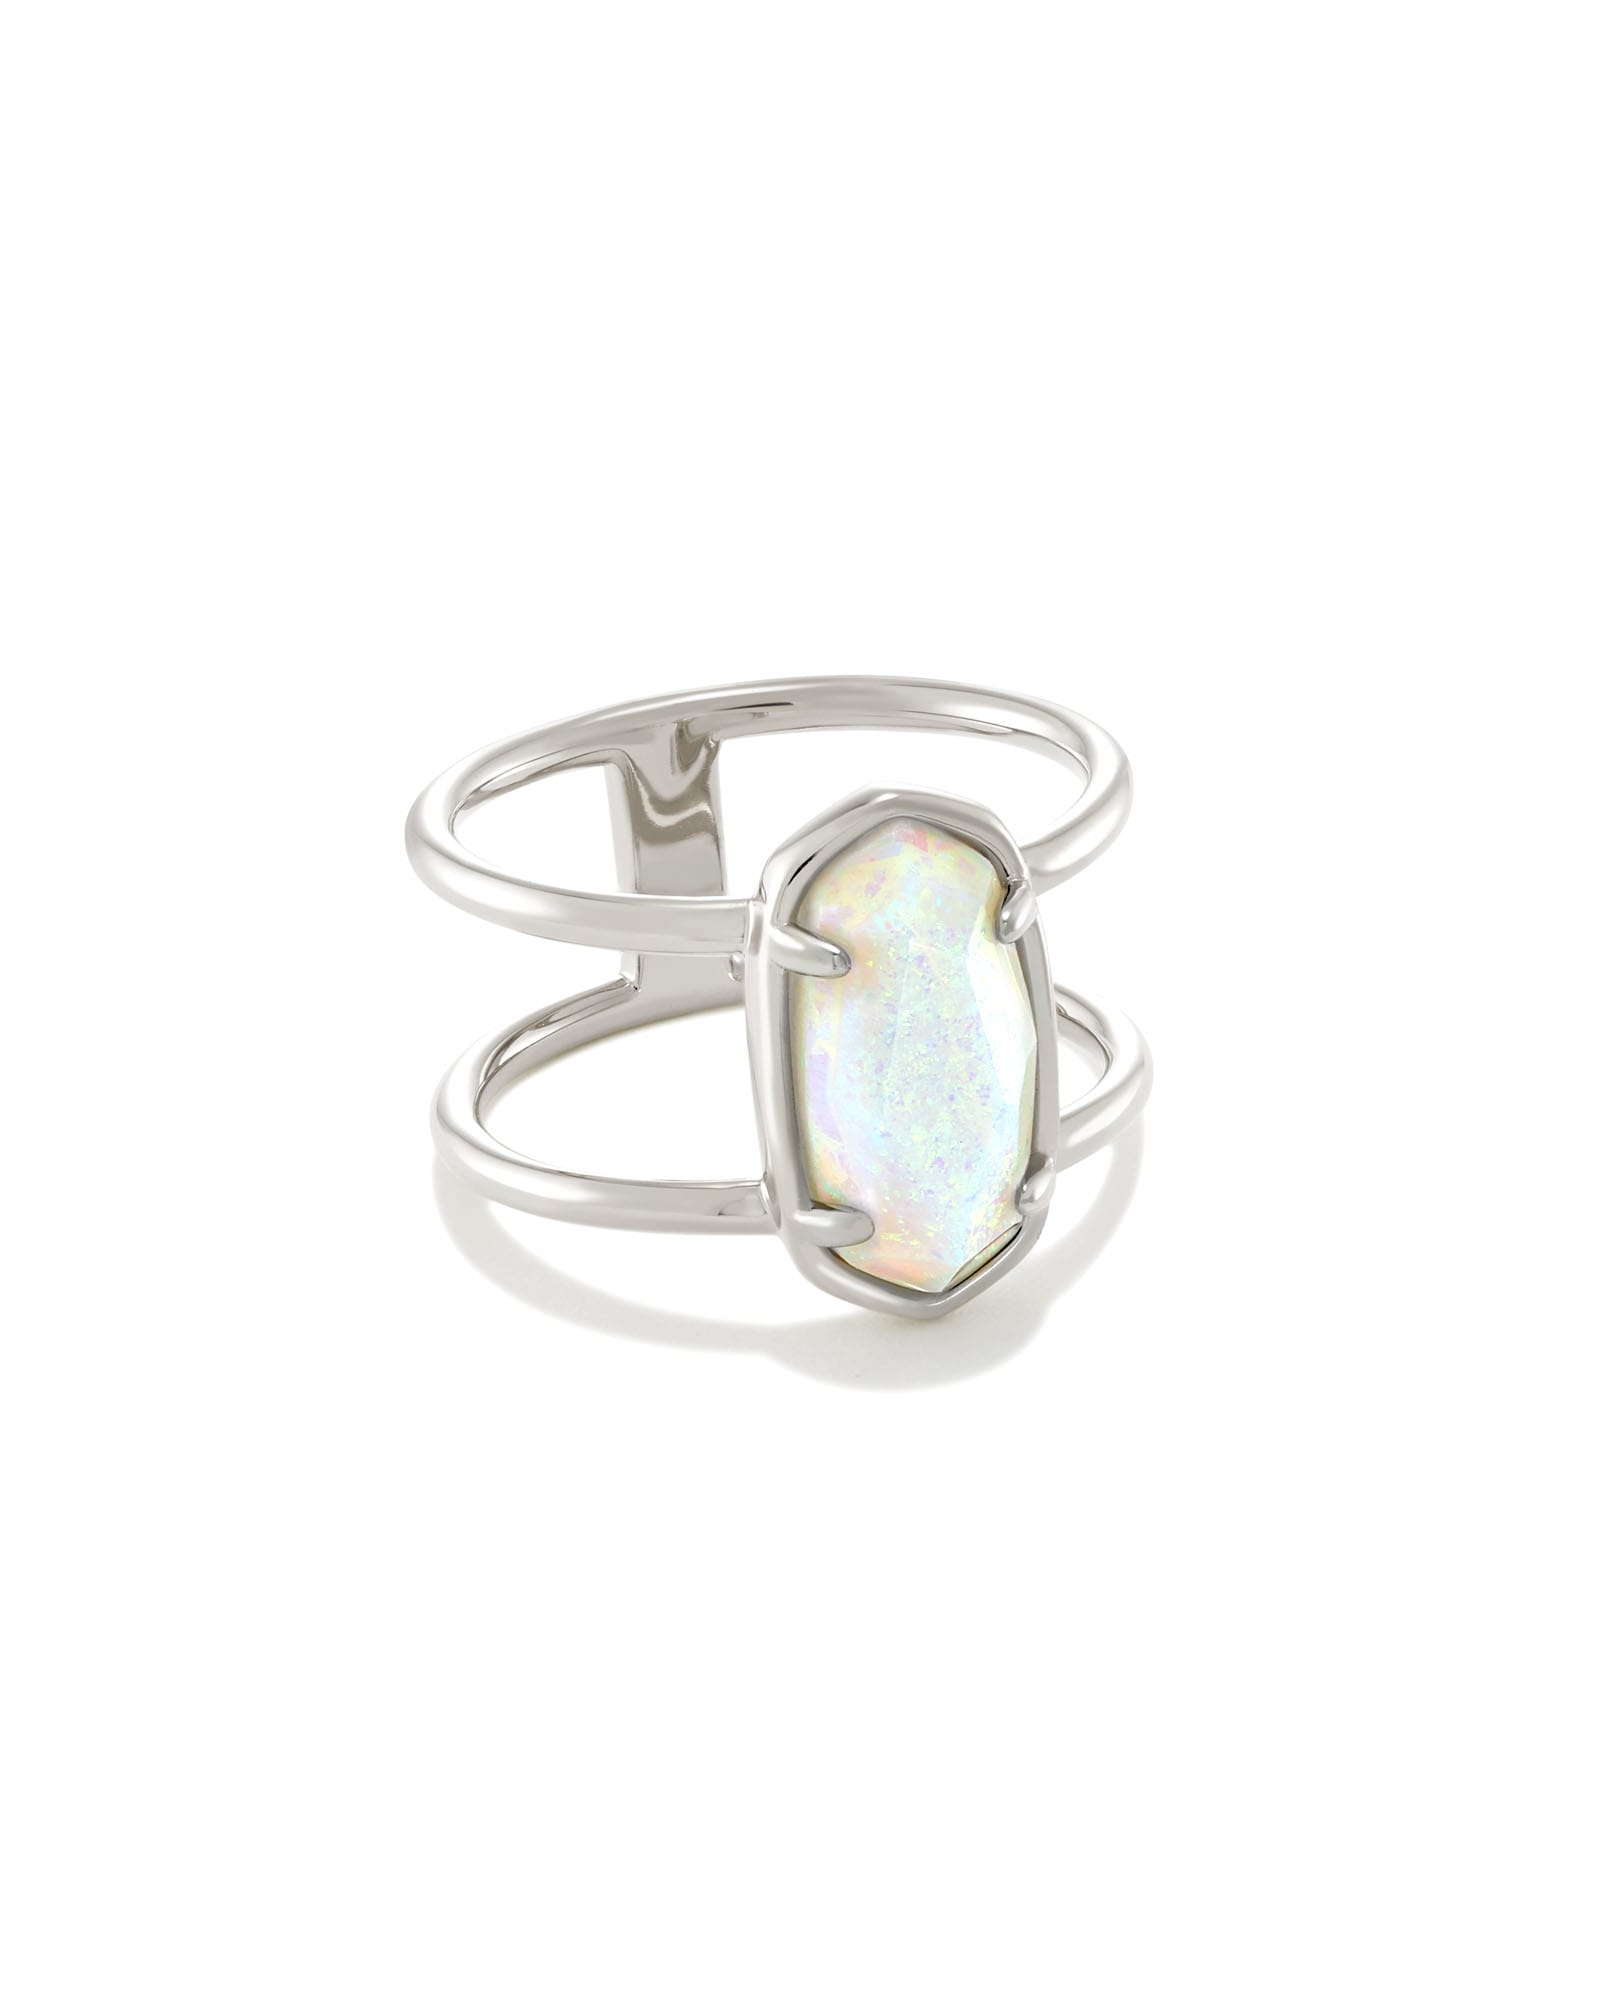 Kendra Scott Elyse Sterling Silver Double Band Ring in White Sterling Opal | Princess Mia Sterling Opal